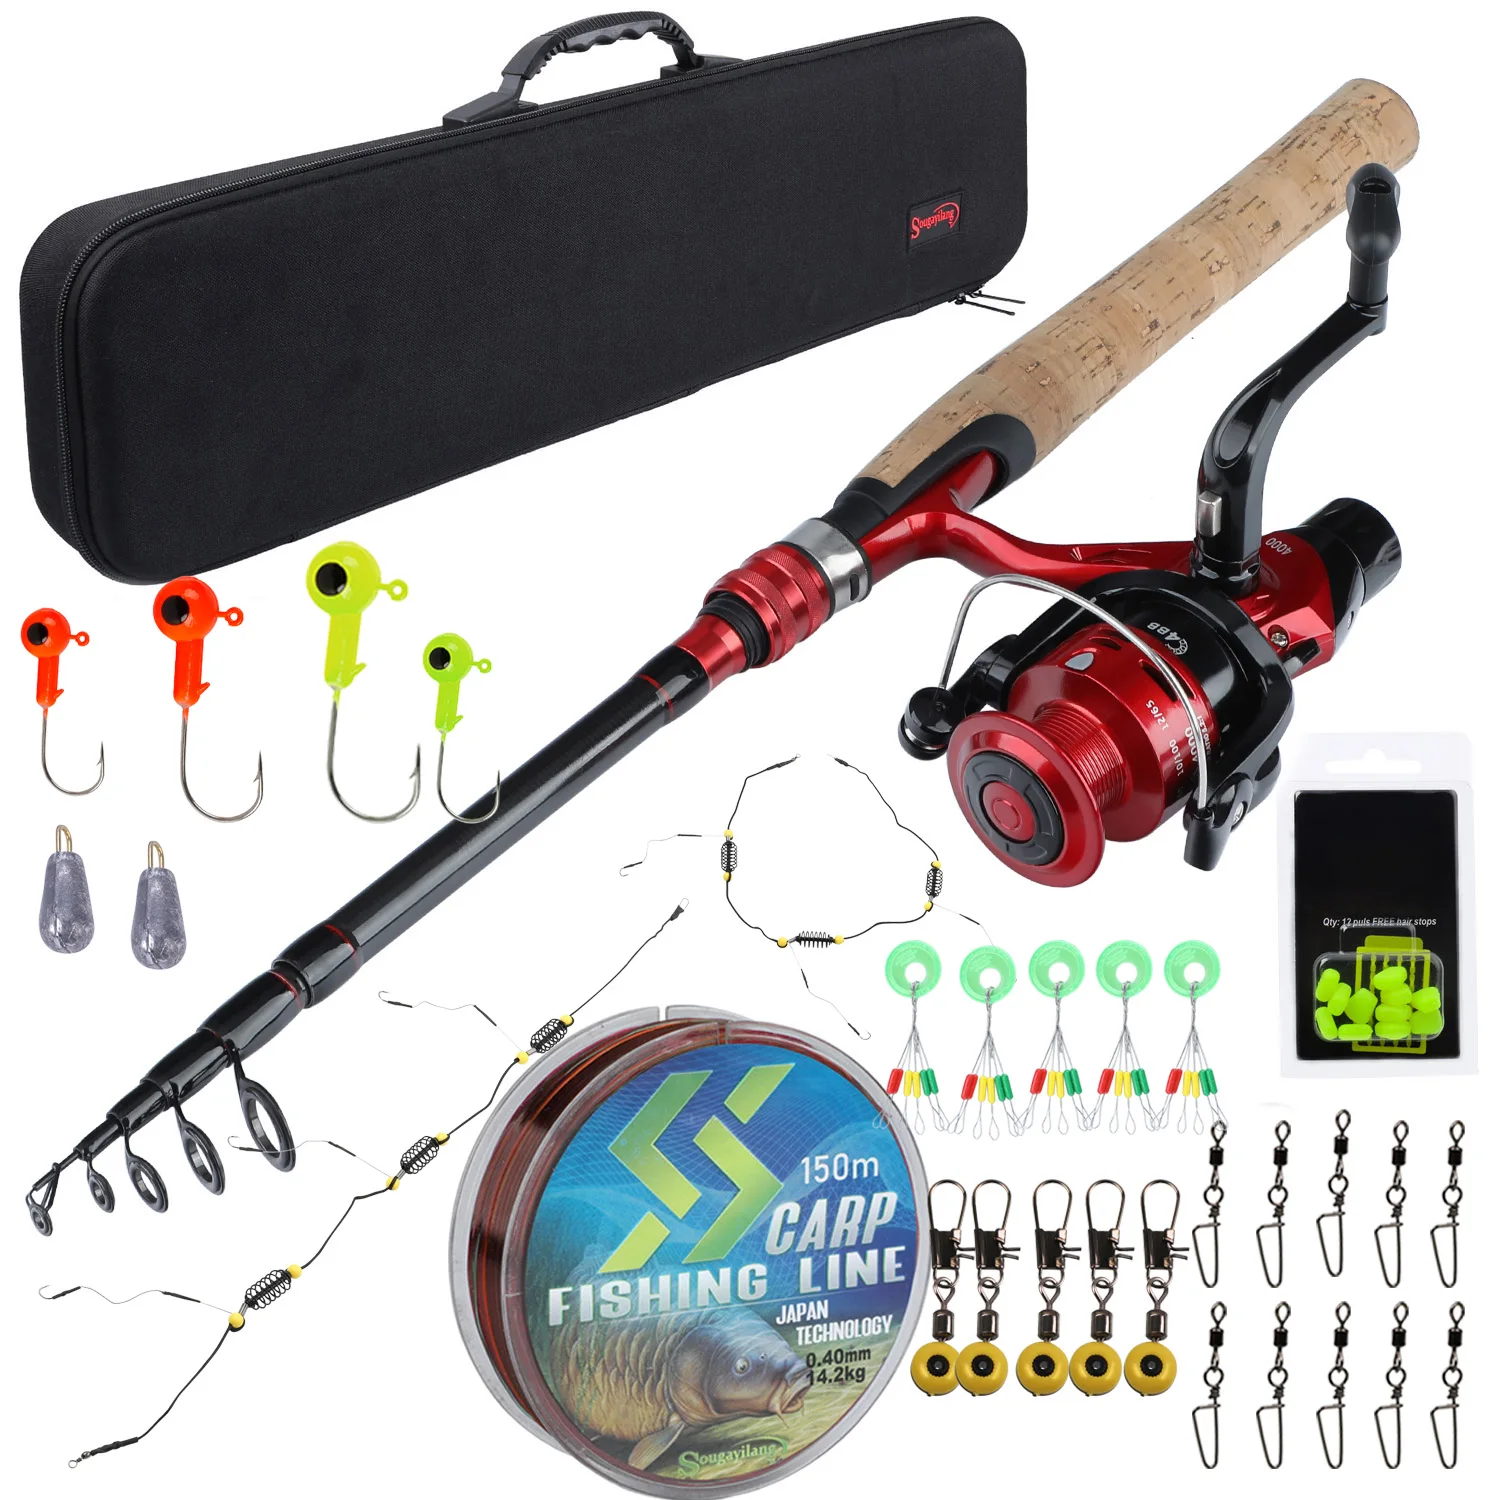 

Sougayilang 1.8M-2.4M Carp Fishing Combo Spinning Feeder Rods and Carp Reel with Fishing Line Lure Hook Carrier Bag Full Kit